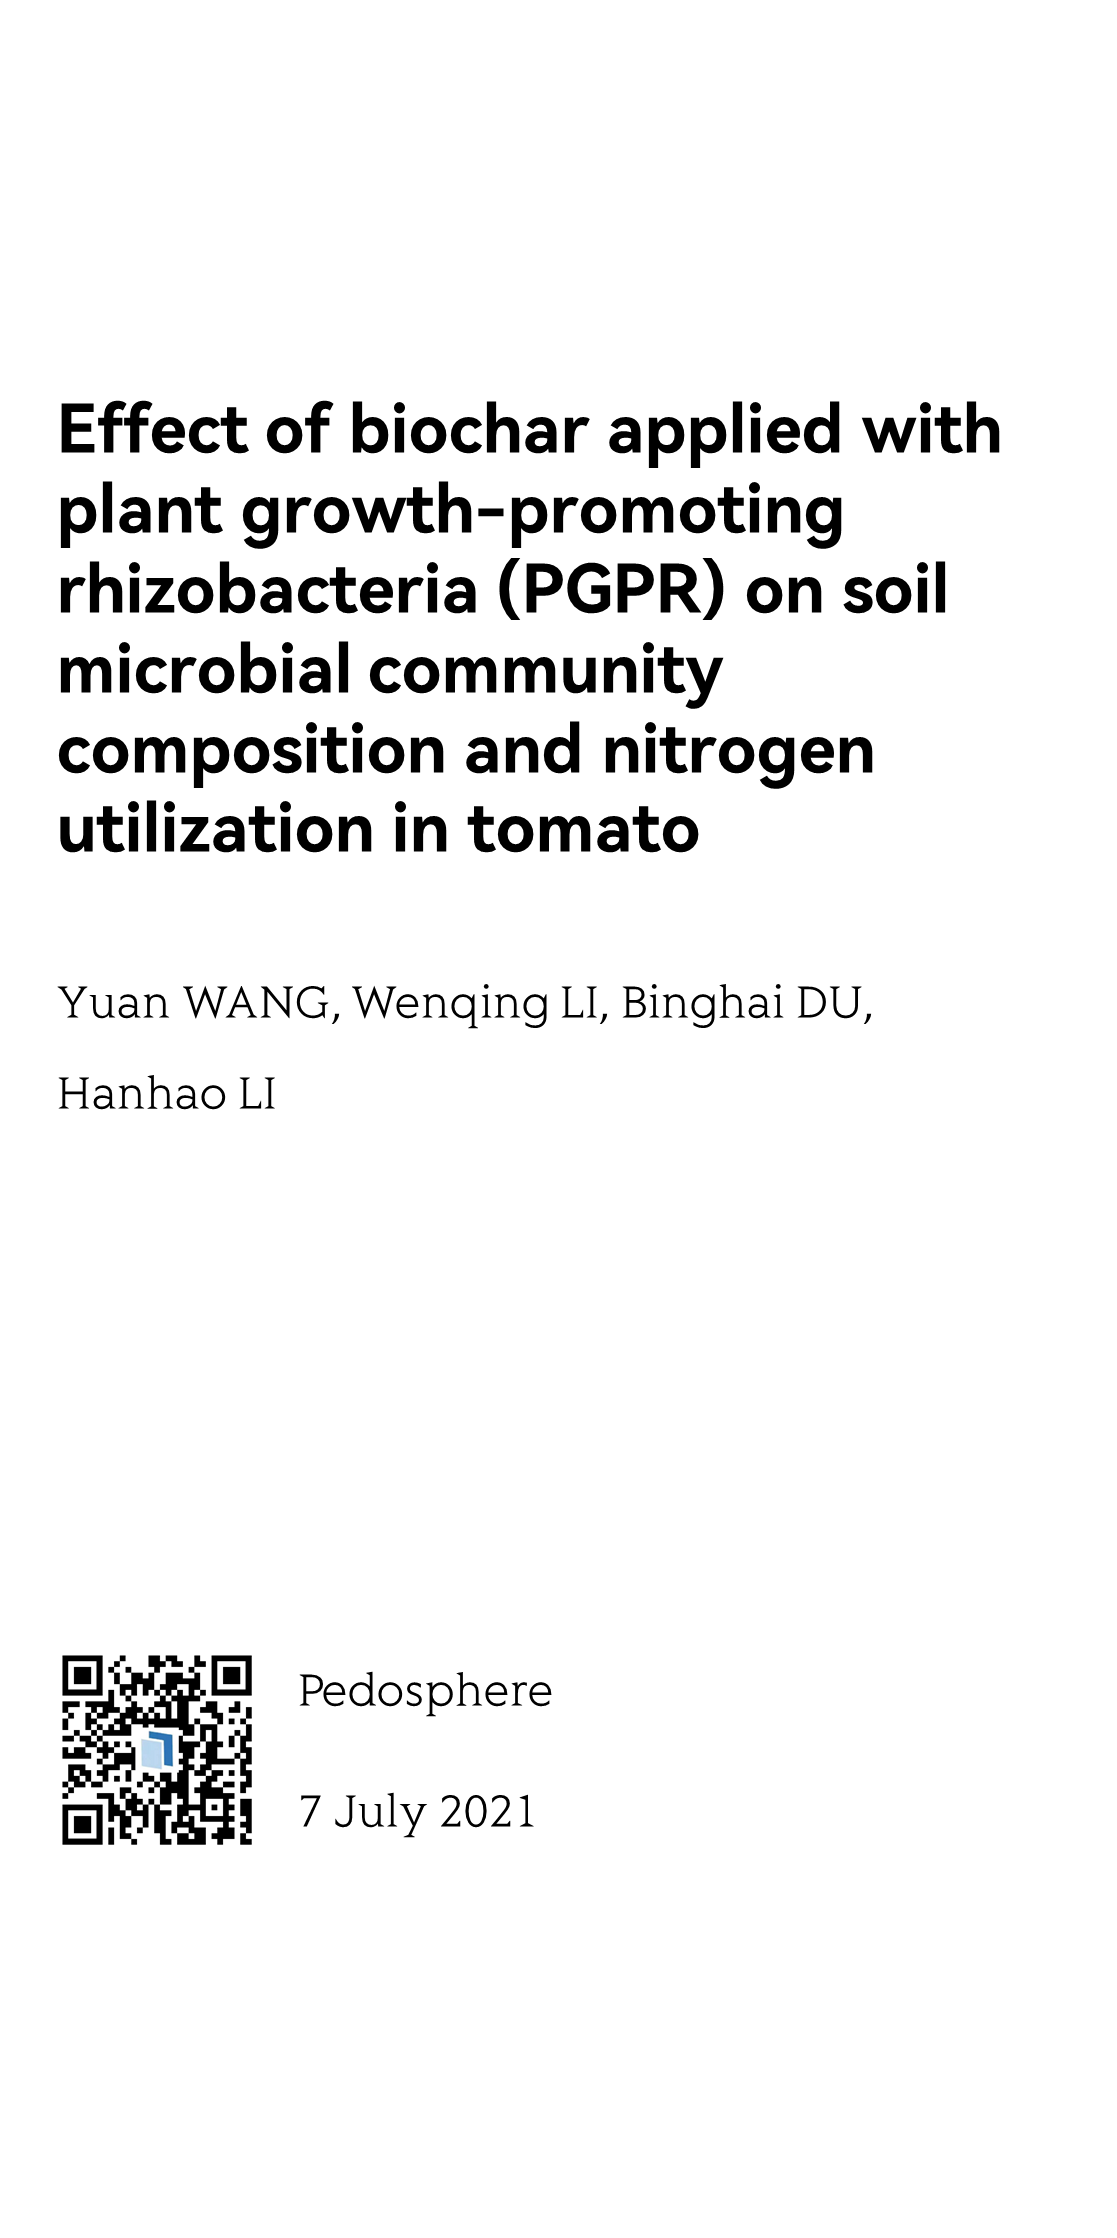 Effect of biochar applied with plant growth-promoting rhizobacteria (PGPR) on soil microbial community composition and nitrogen utilization in tomato_1